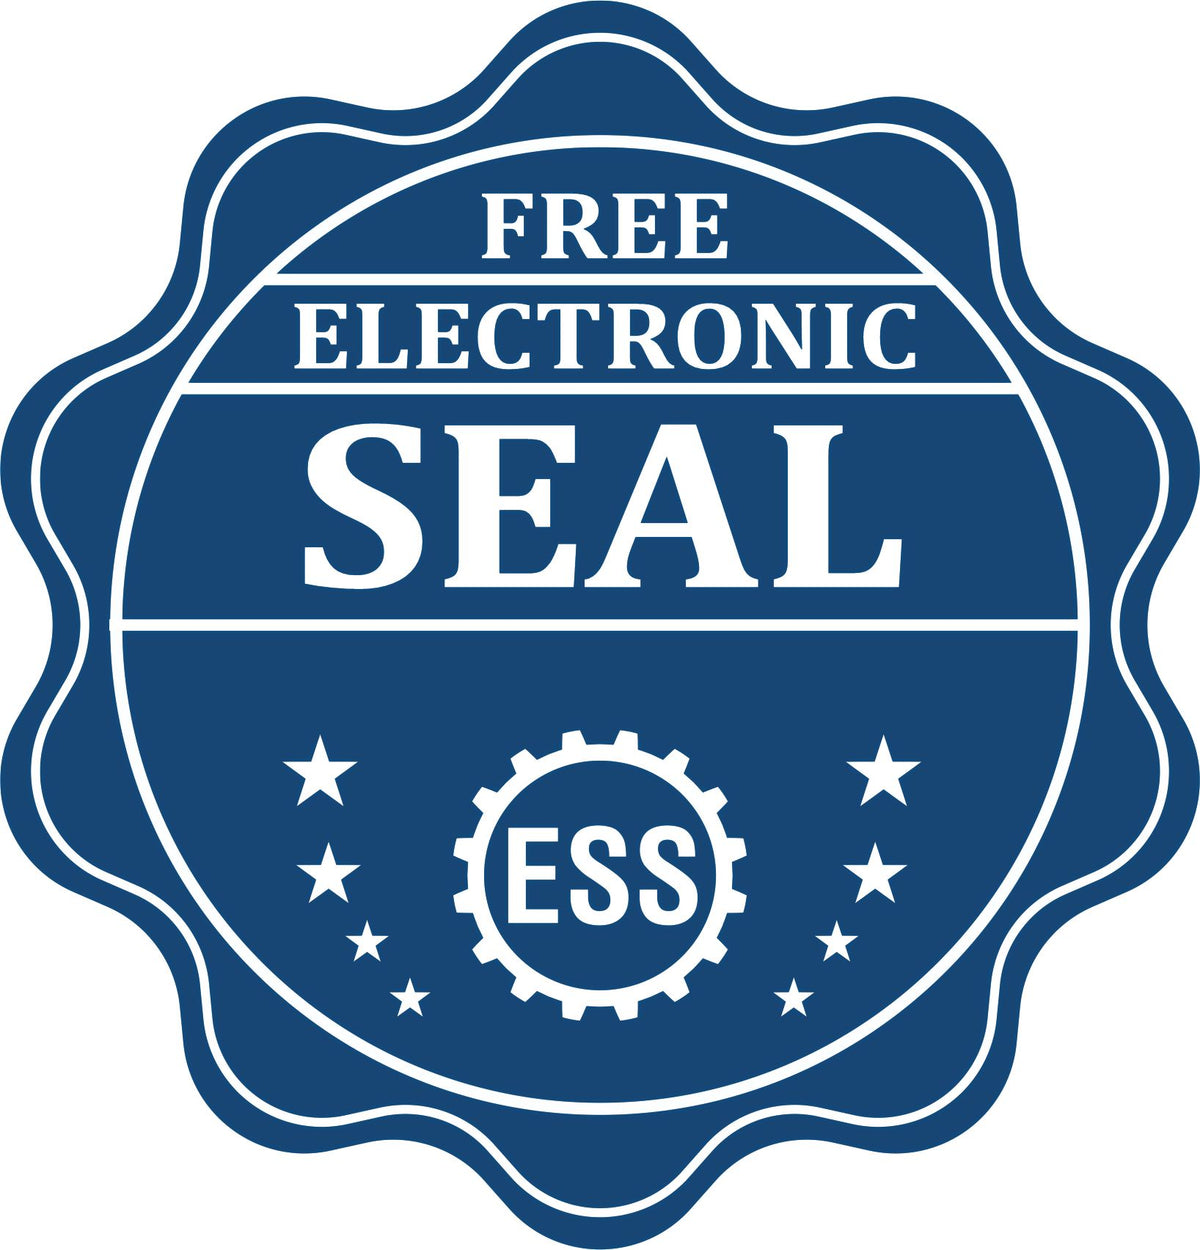 A badge showing a free electronic seal for the Gift Mississippi Geologist Seal with stars and the ESS gear on the emblem.